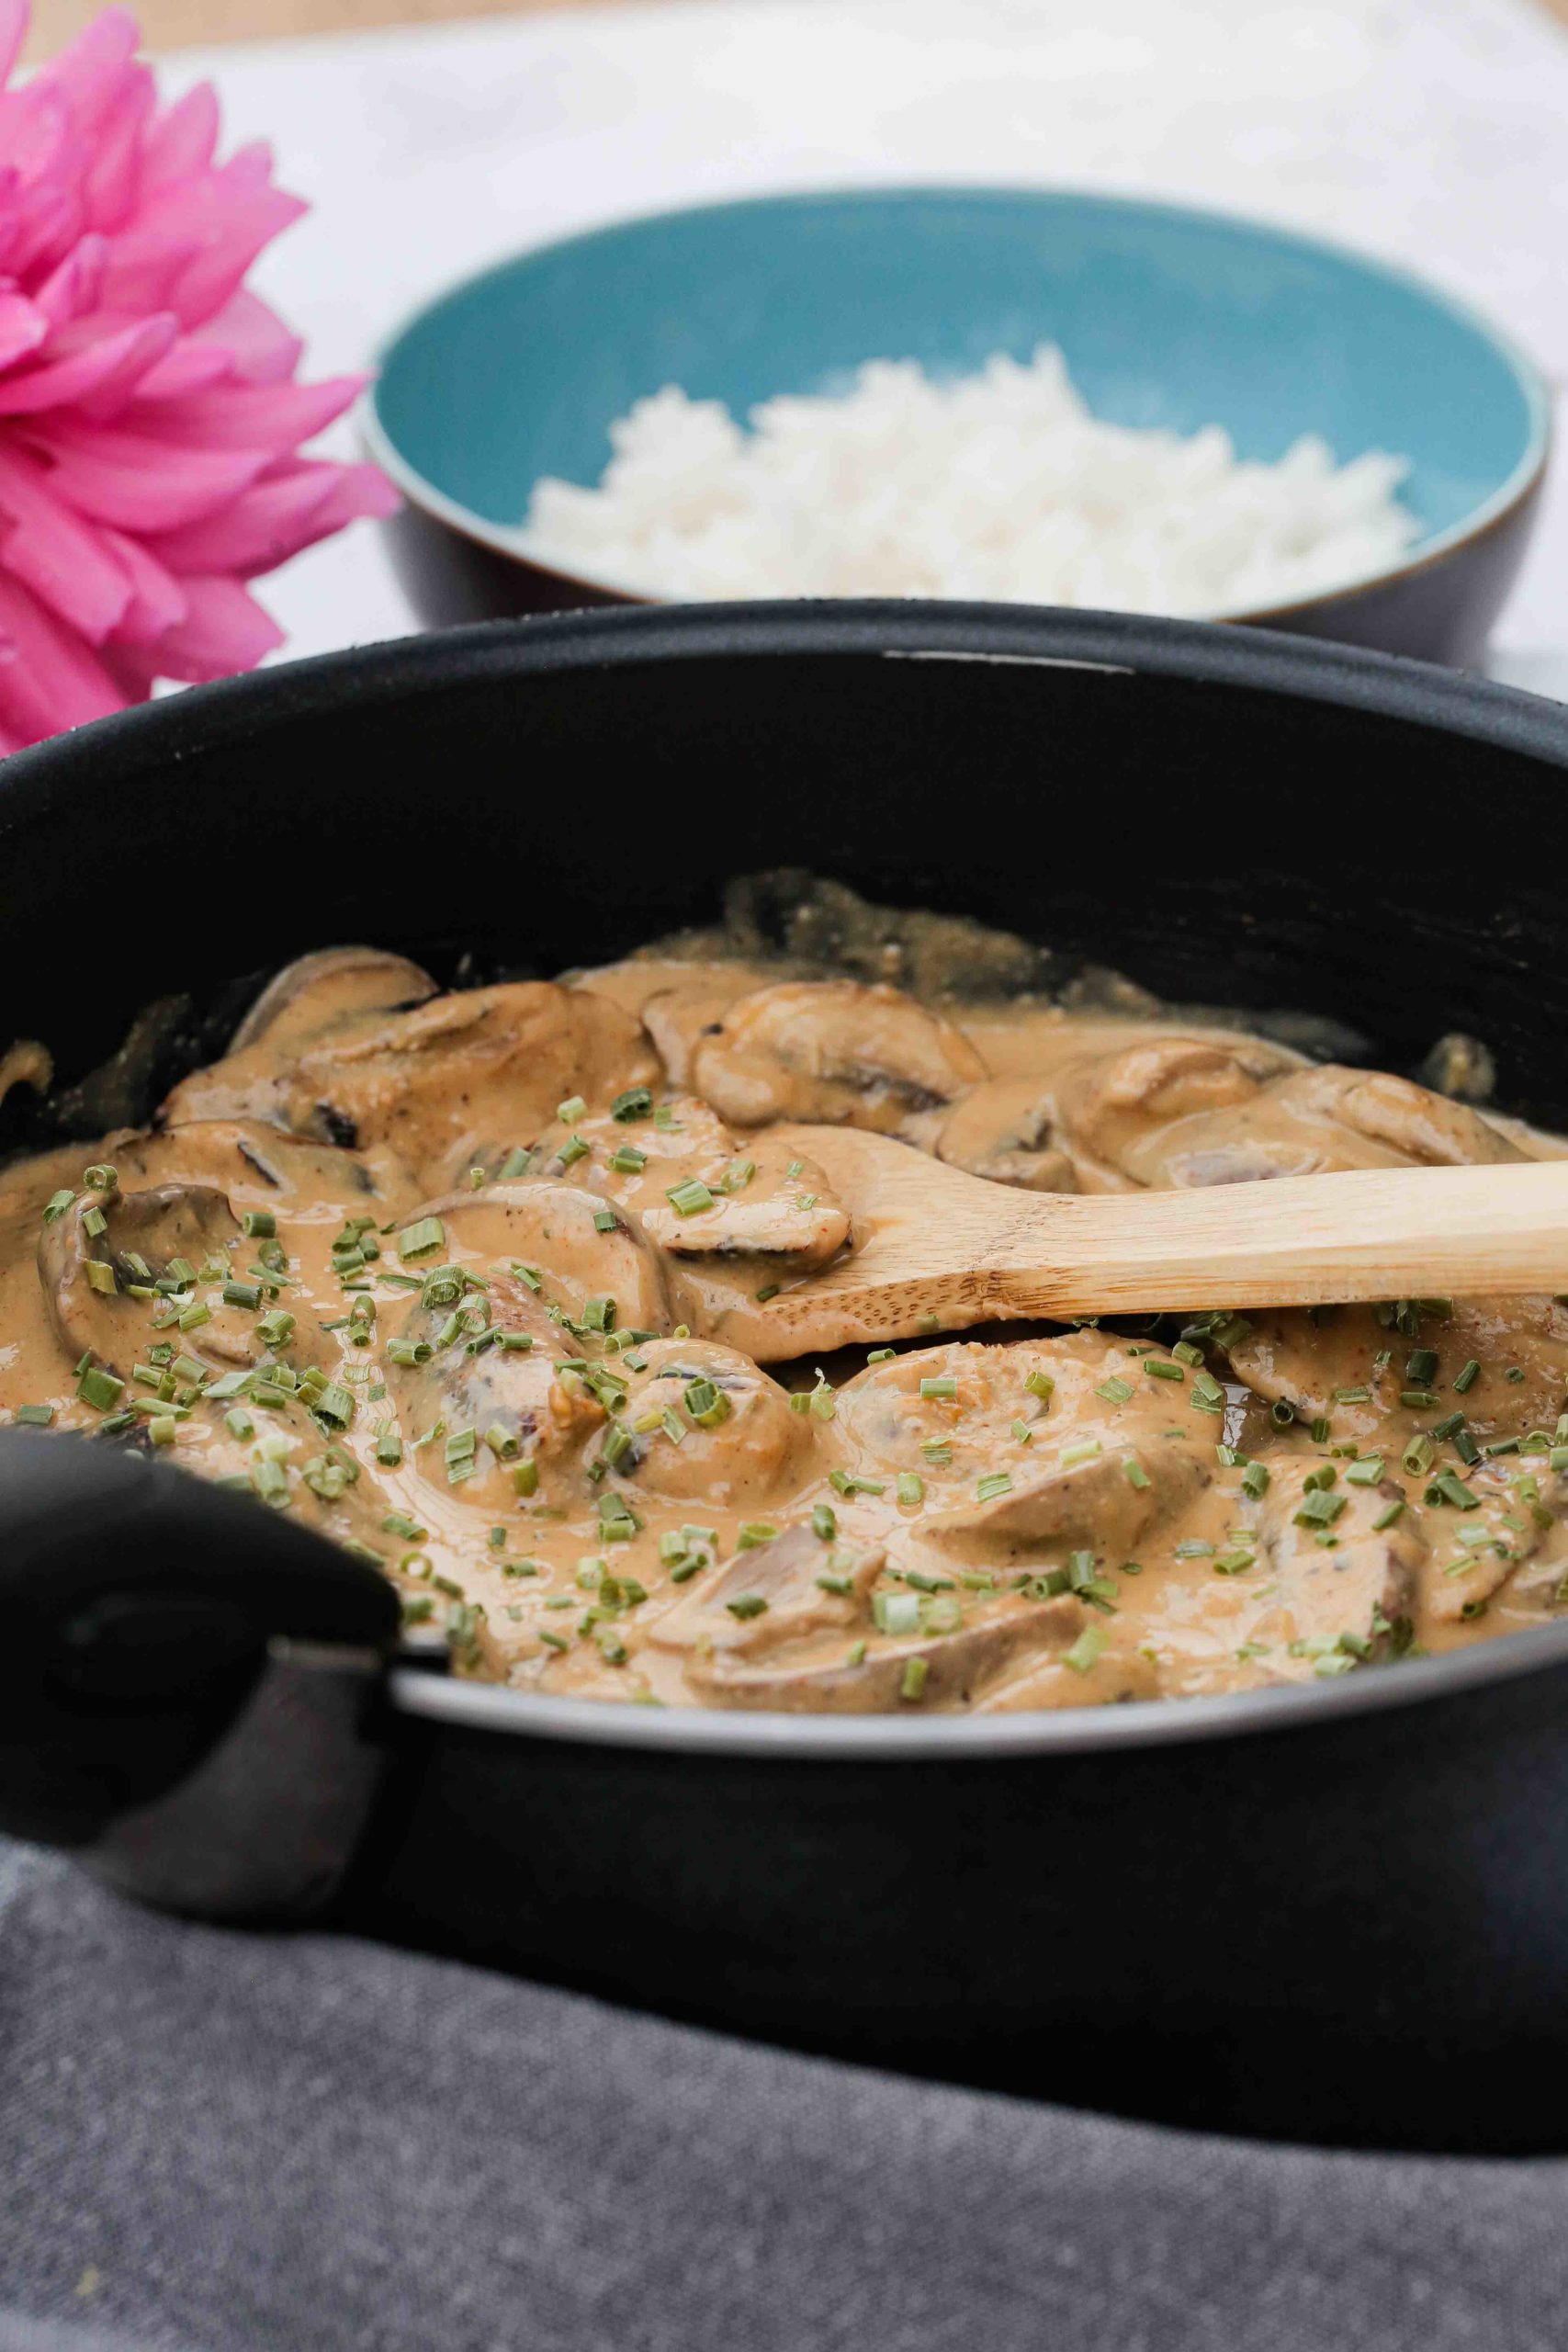 Creamy, full of flavour and SO tasty, this vegan mushroom stroganoff is made all in one pan for a speedy meal that's perfect for lunch or dinner! It's rich, warm and hearty and totally delivers on flavour | Recipe on thecookandhim.com #stroganoff #veganstroganoff #mushroomstroganoff #veganrecipes #veganmeal #easyvegan